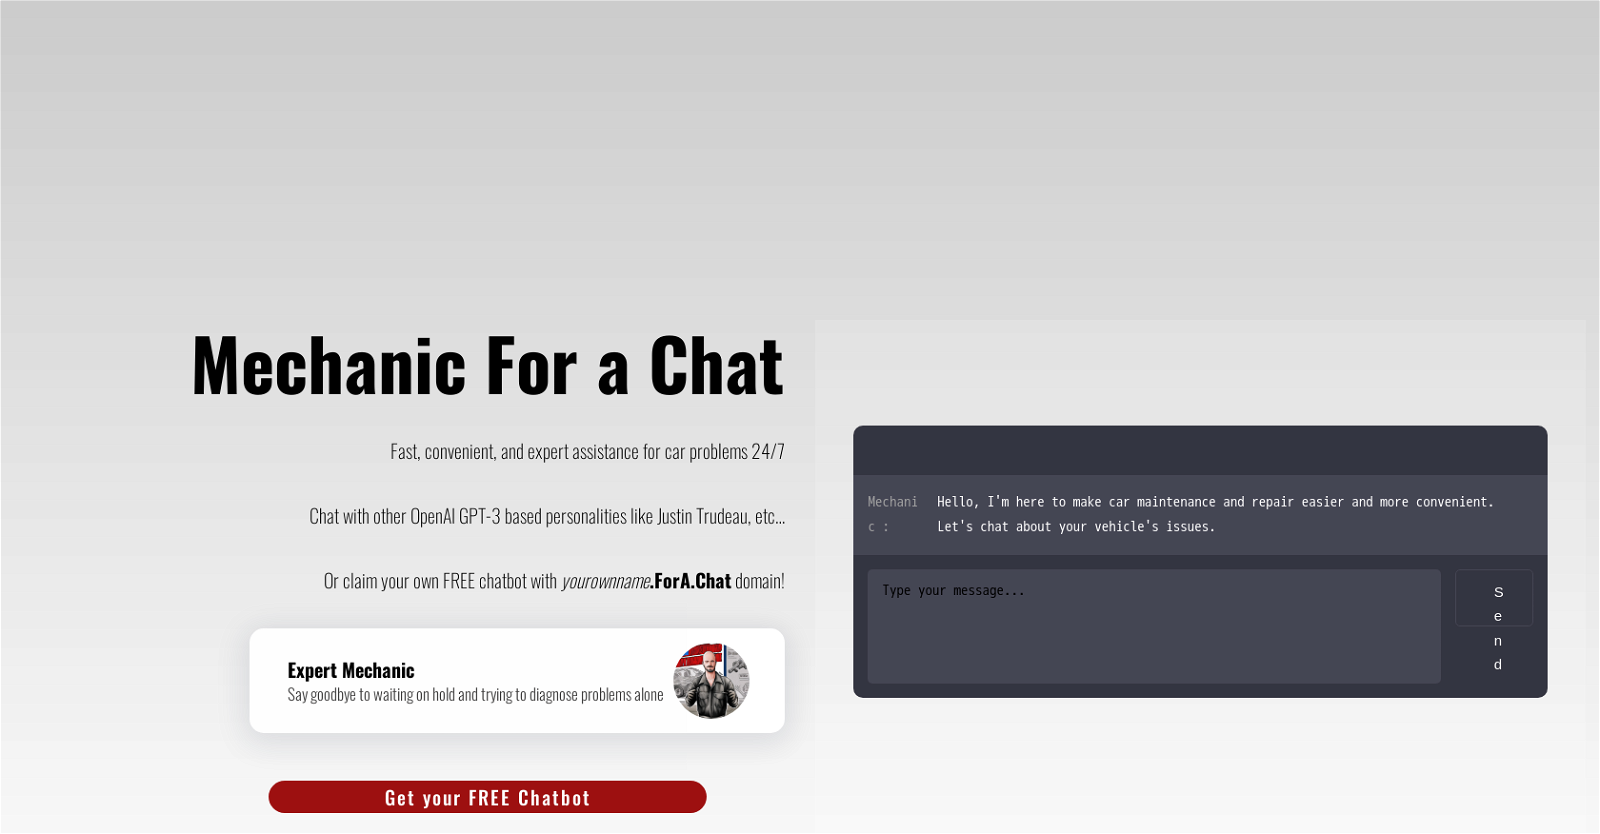 Mechanic For a Chat website